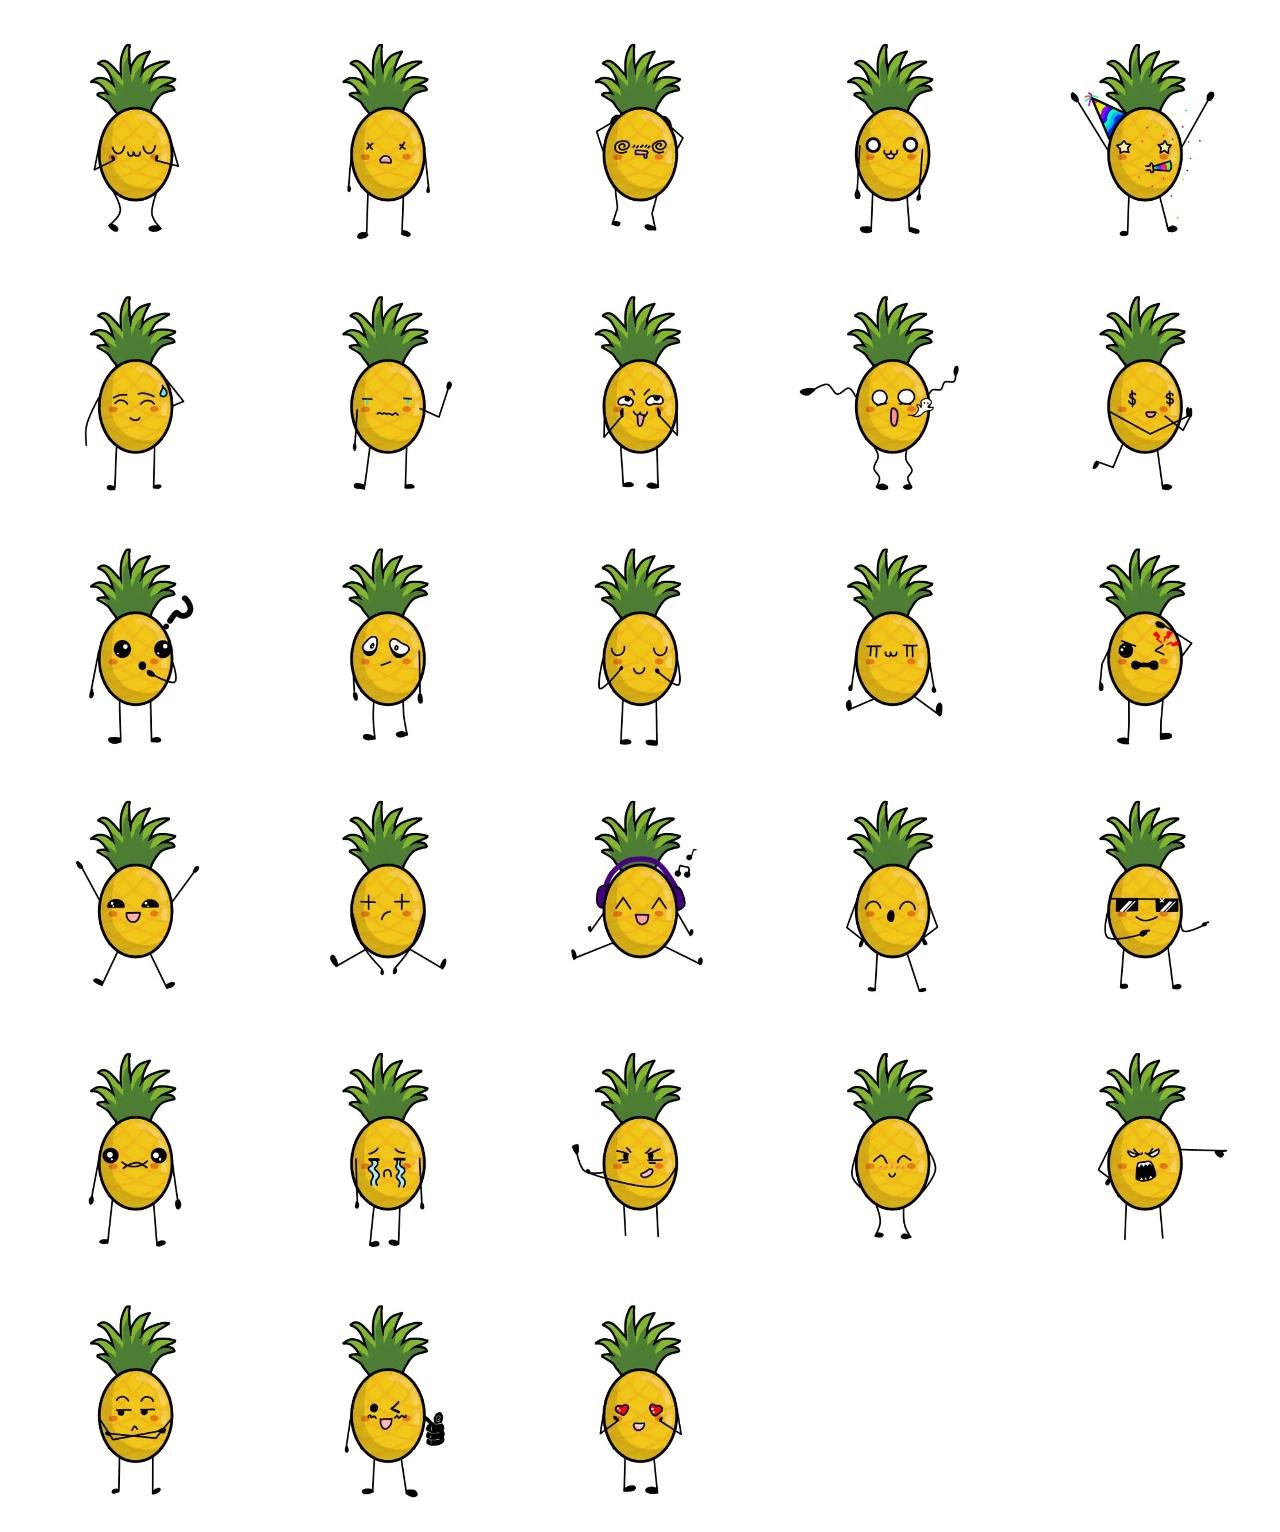 Cool pineapple Food/Drink,Etc. sticker pack for Whatsapp, Telegram, Signal, and others chatting and message apps